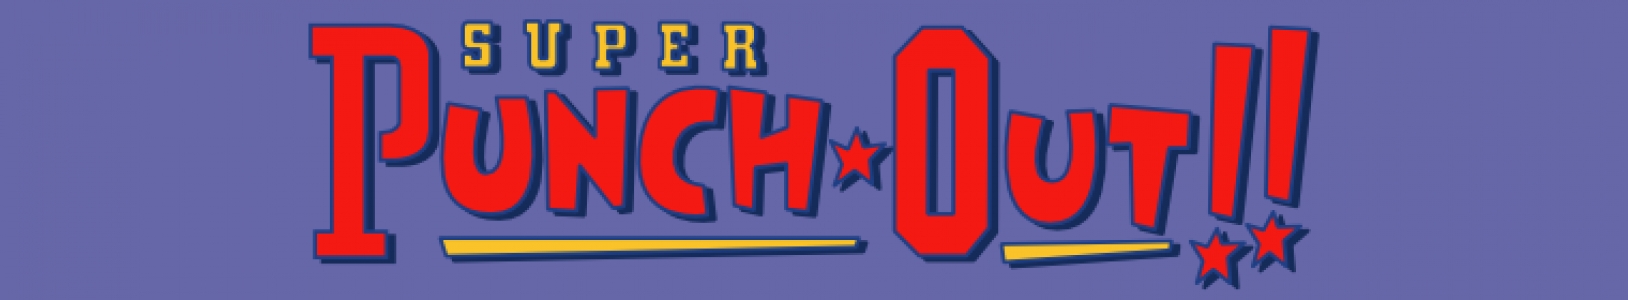 Super Punch-Out!! banner